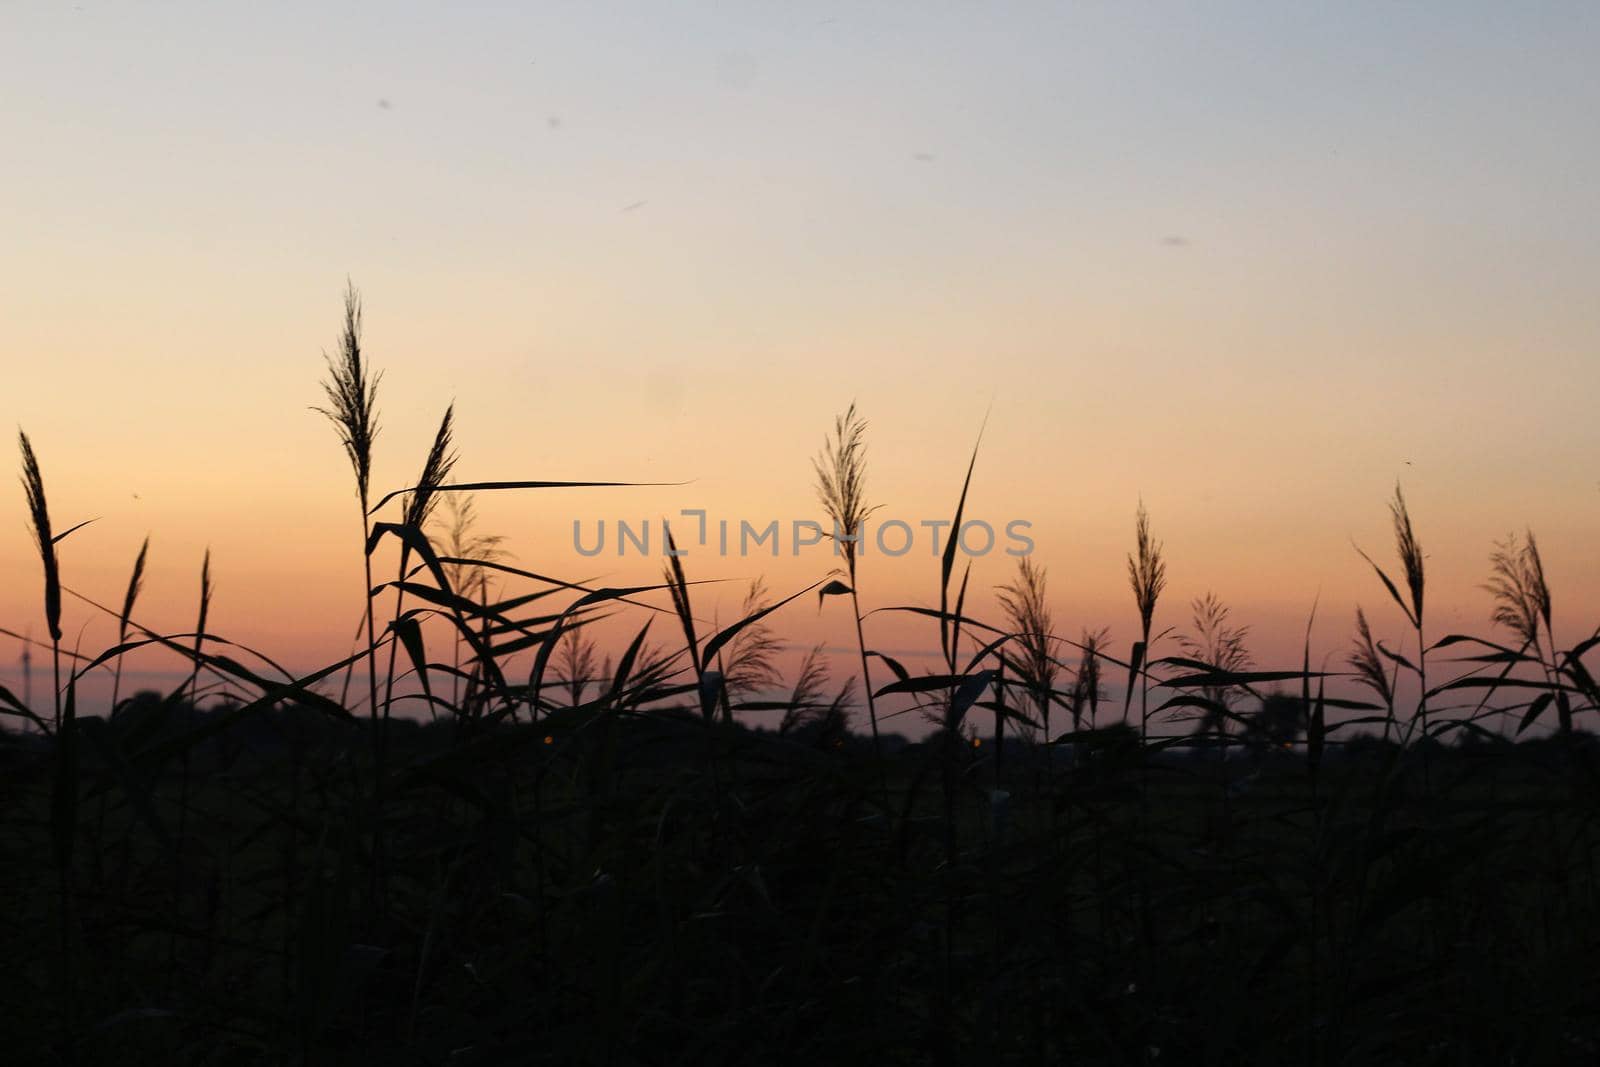 Beautyful sunset with reeds in the foreground